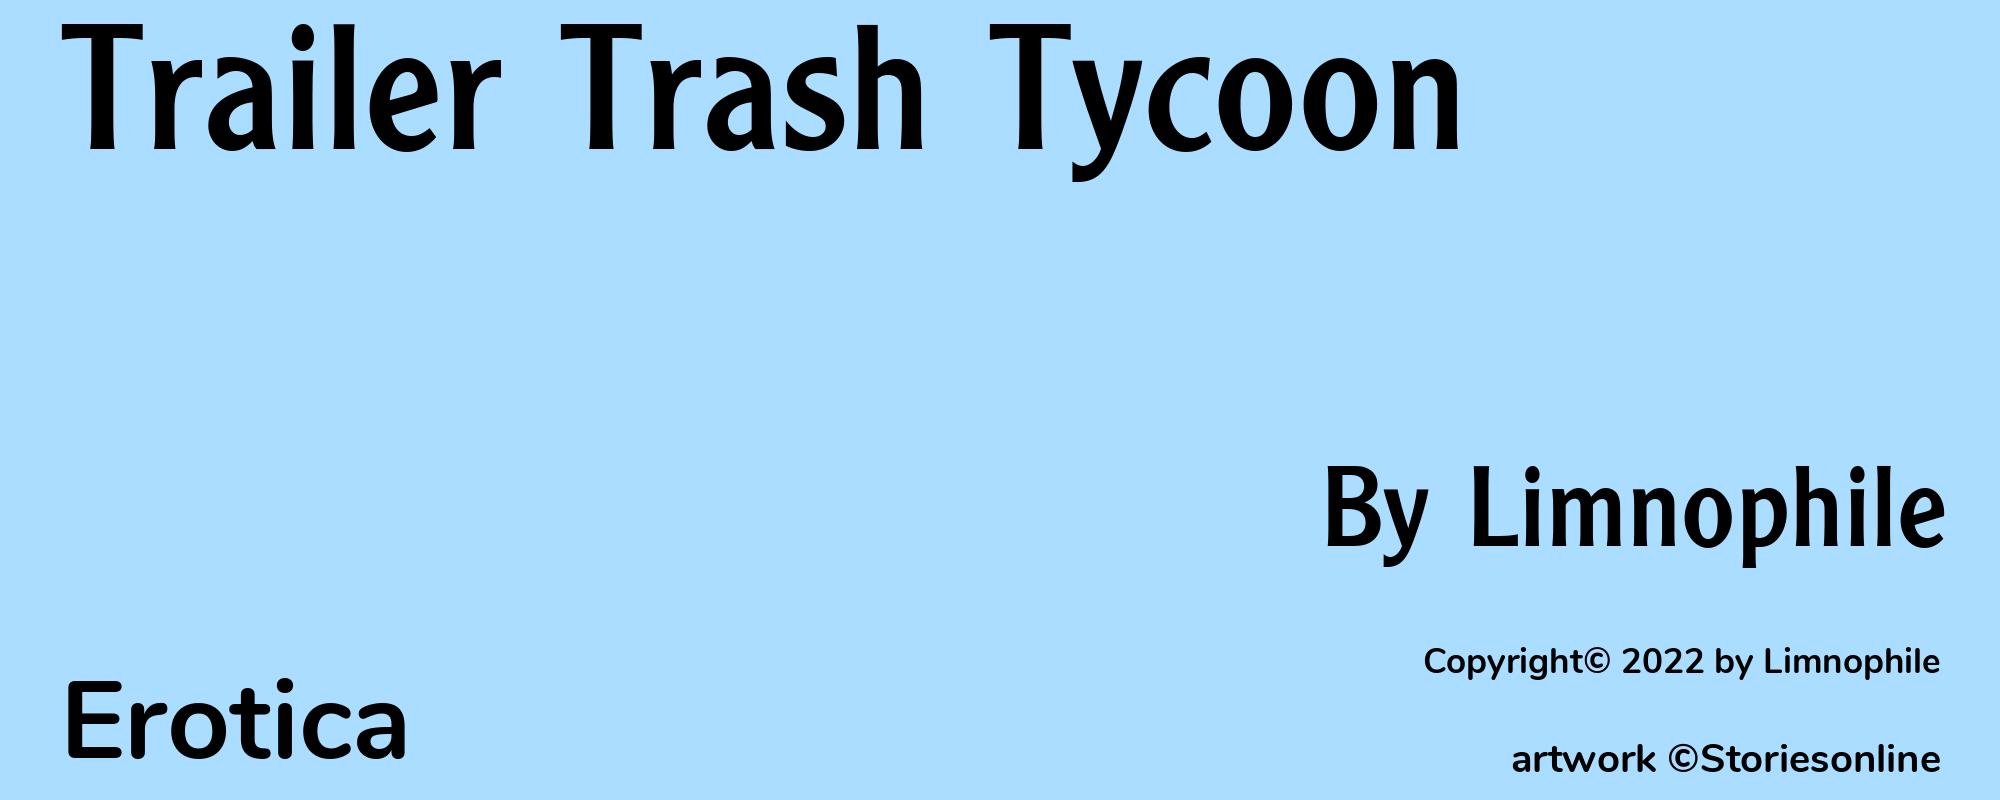 Trailer Trash Tycoon - Cover